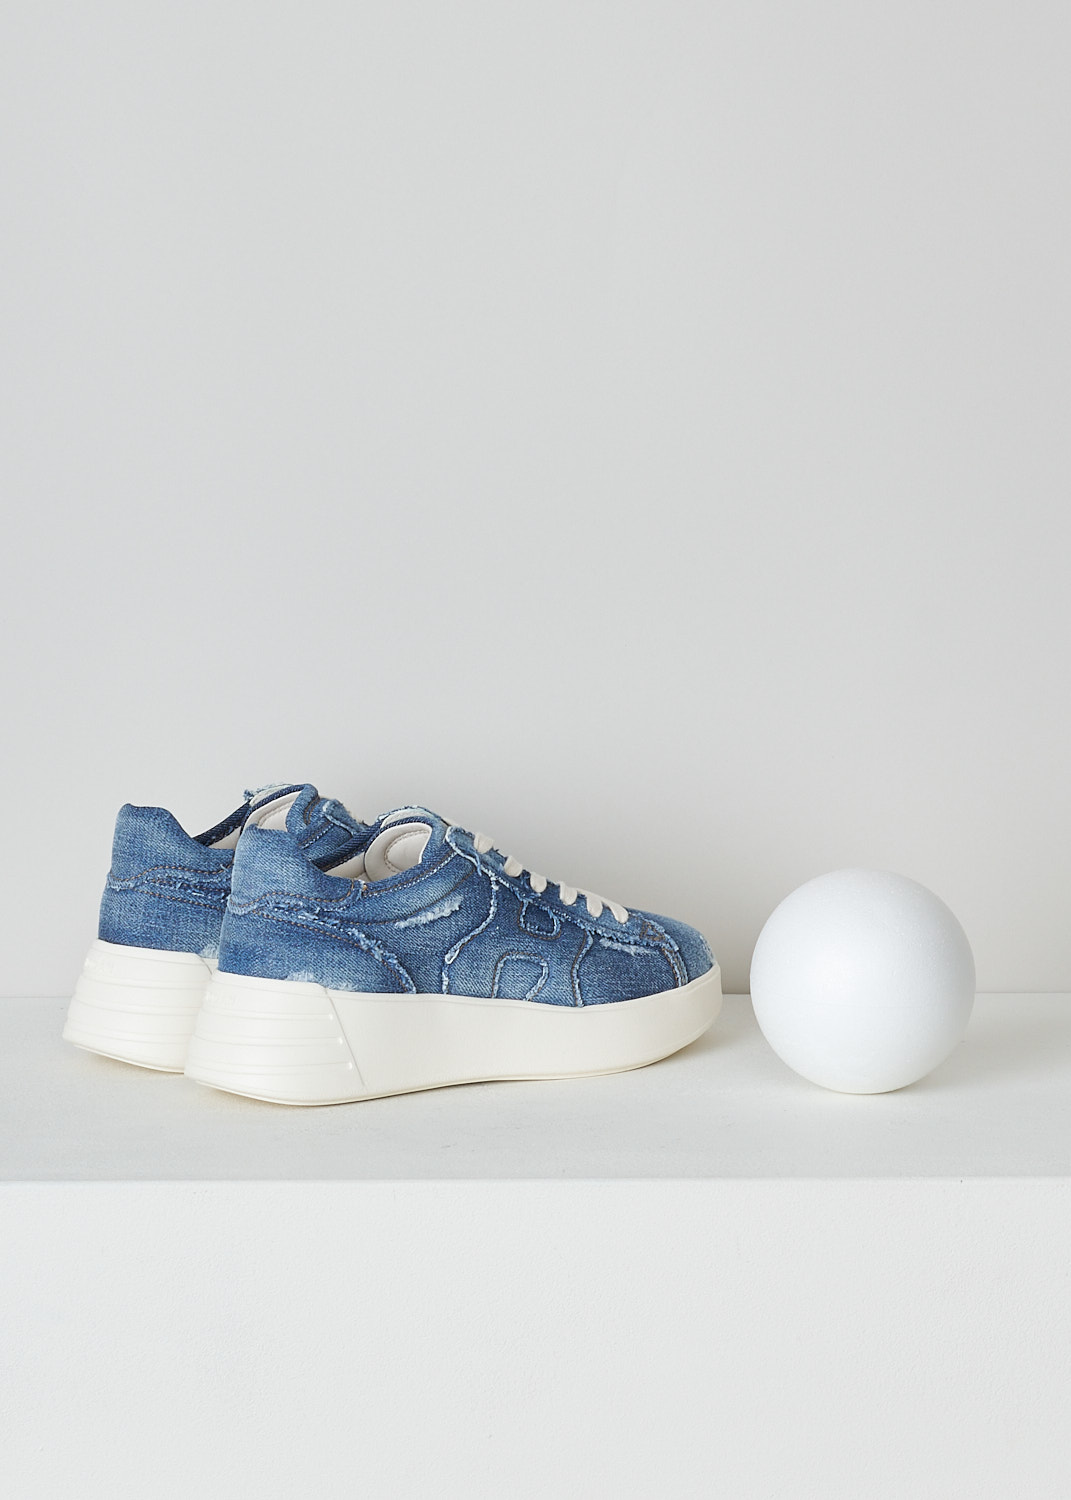 HOGAN, REBEL H562 ALL JEANS SNEAKER, GYW5620EY80JDLU803_H562, Blue, Back, These Rebel H562 All Jeans sneakers are made in a distressed denim fabric. These sneakers have a front lace-up fastening with white laces. These sneakers have a round nose and a broad white rubber sole. On the sides, the brand's H logo is incorporated in the design. The sneakers come with an additional pair of laces in blue. 
